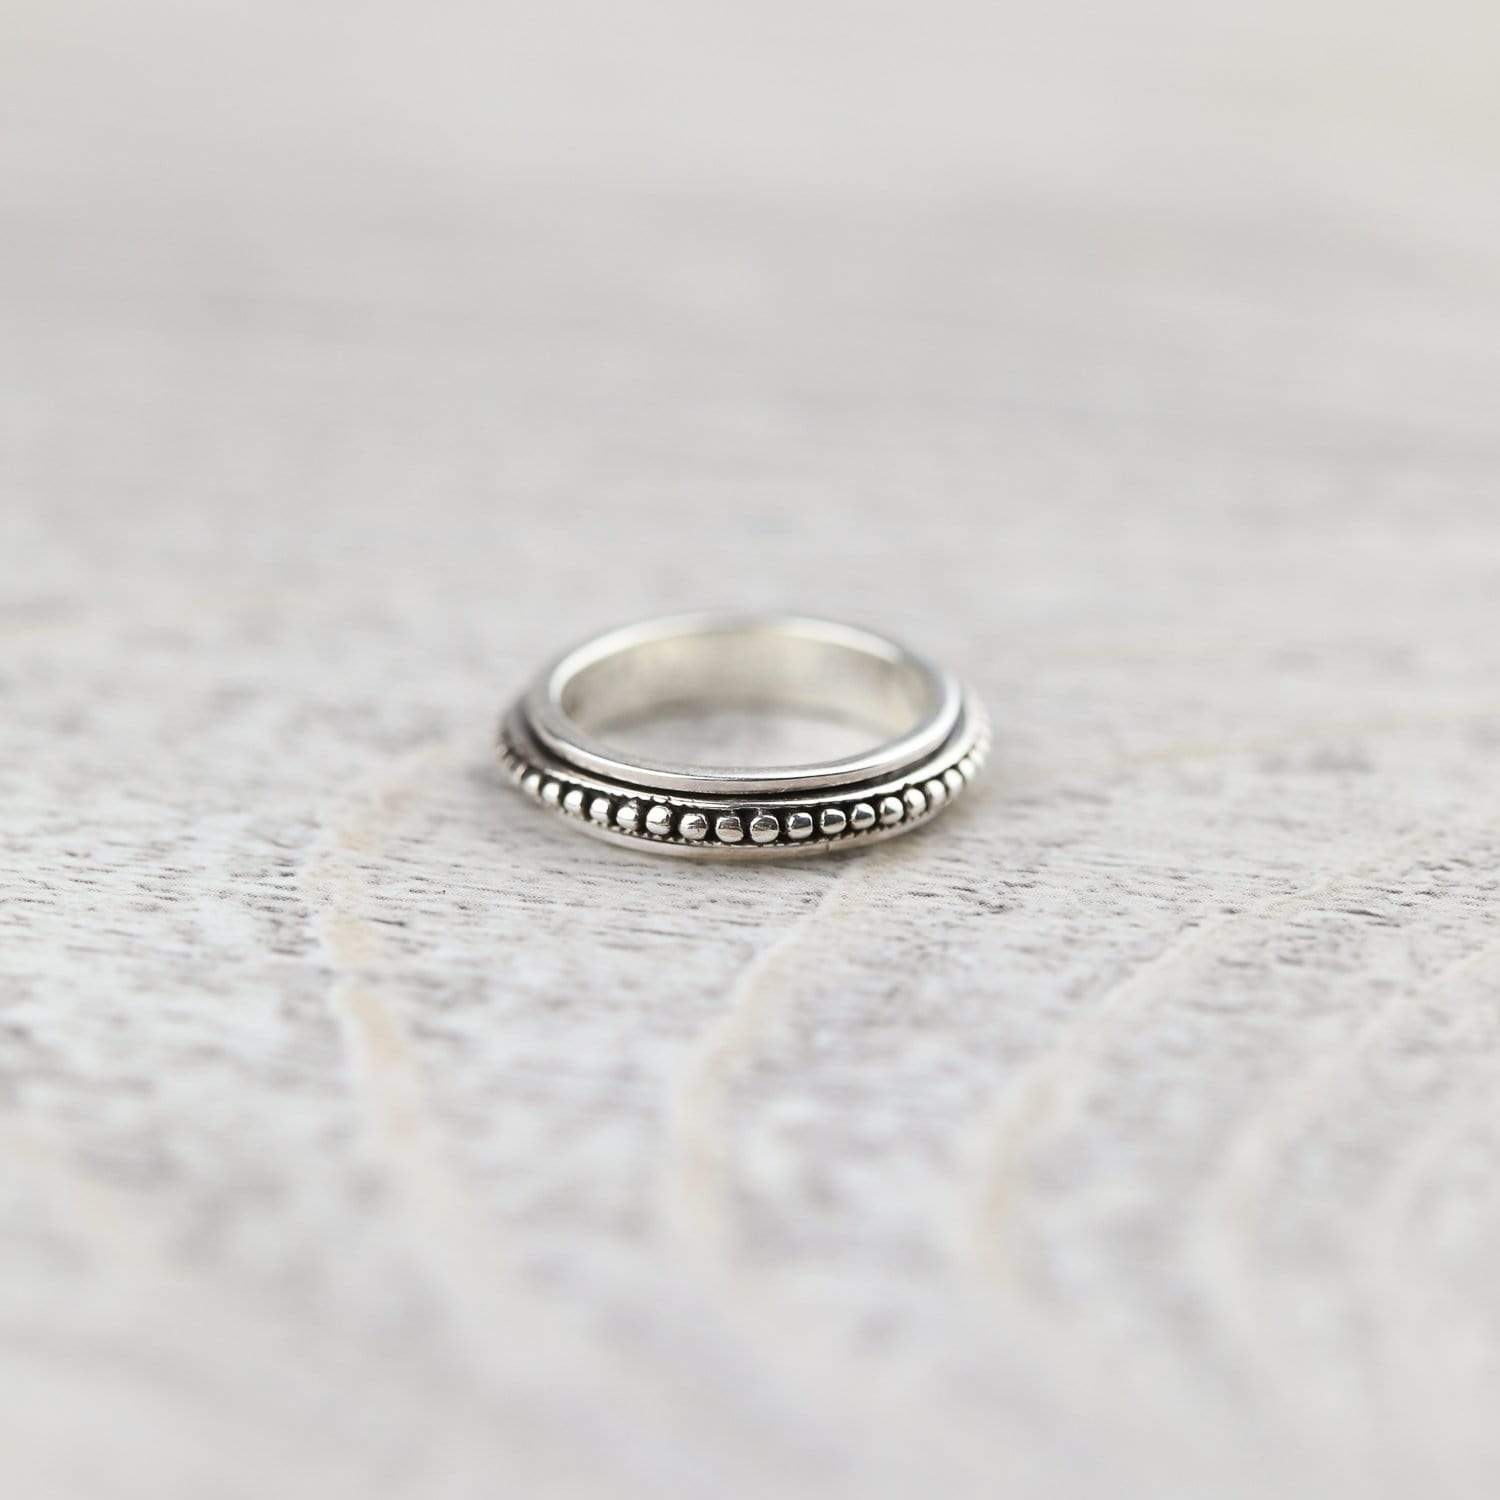 Spinning Mindfulness Ring